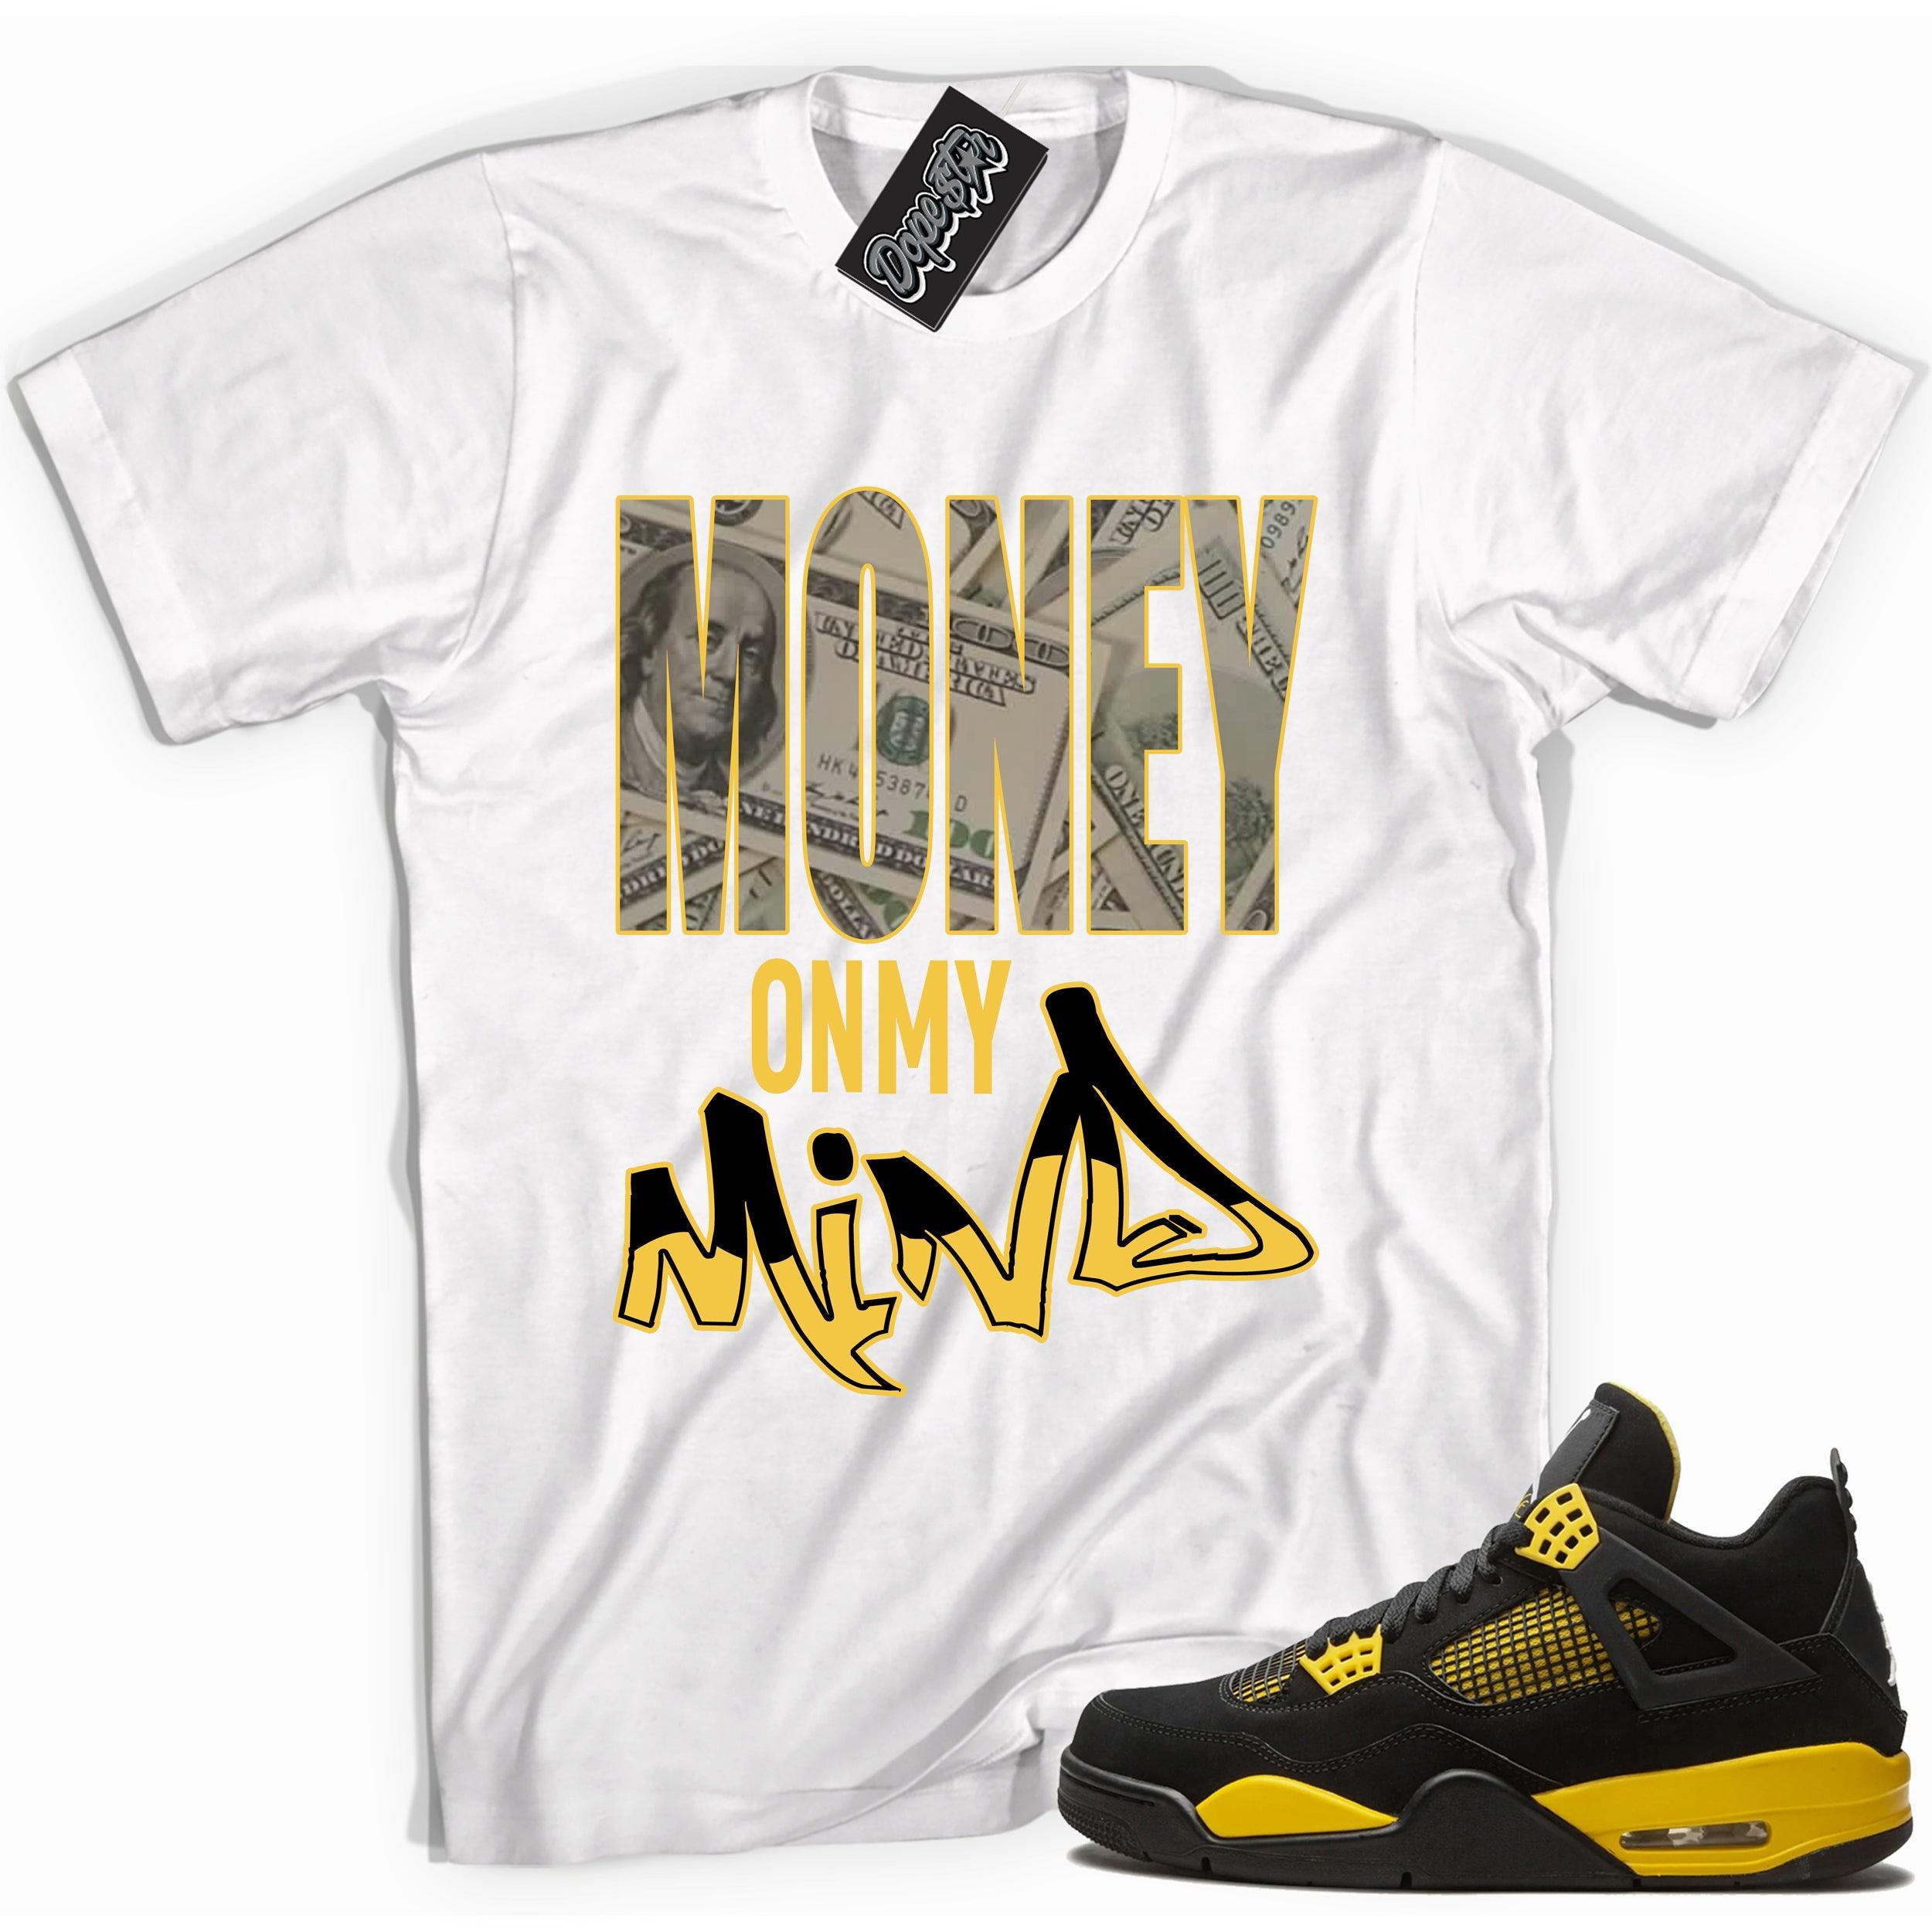 Cool white graphic tee with 'money on mind' print, that perfectly matches Air Jordan 4 Thunder sneakers